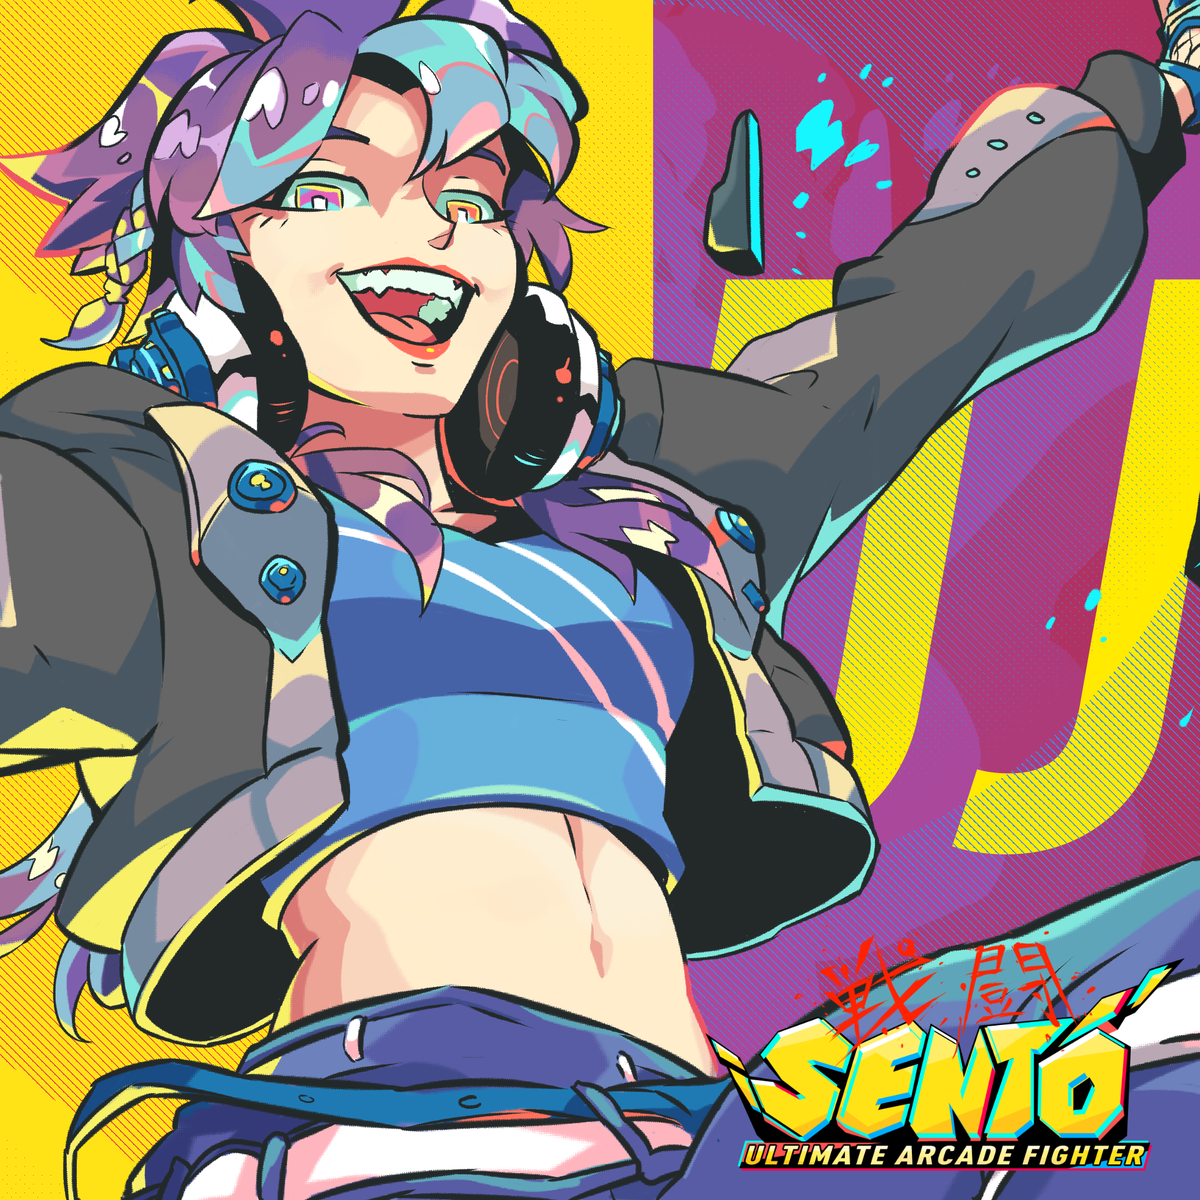 DJ's magical turntables imbue her emotions into the sound waves they emit. It can make her listeners experience super natural euphoria, or when in combat, put her opponents into pain and chaos as the sound waves shake them to their very core. #SENTOfighter